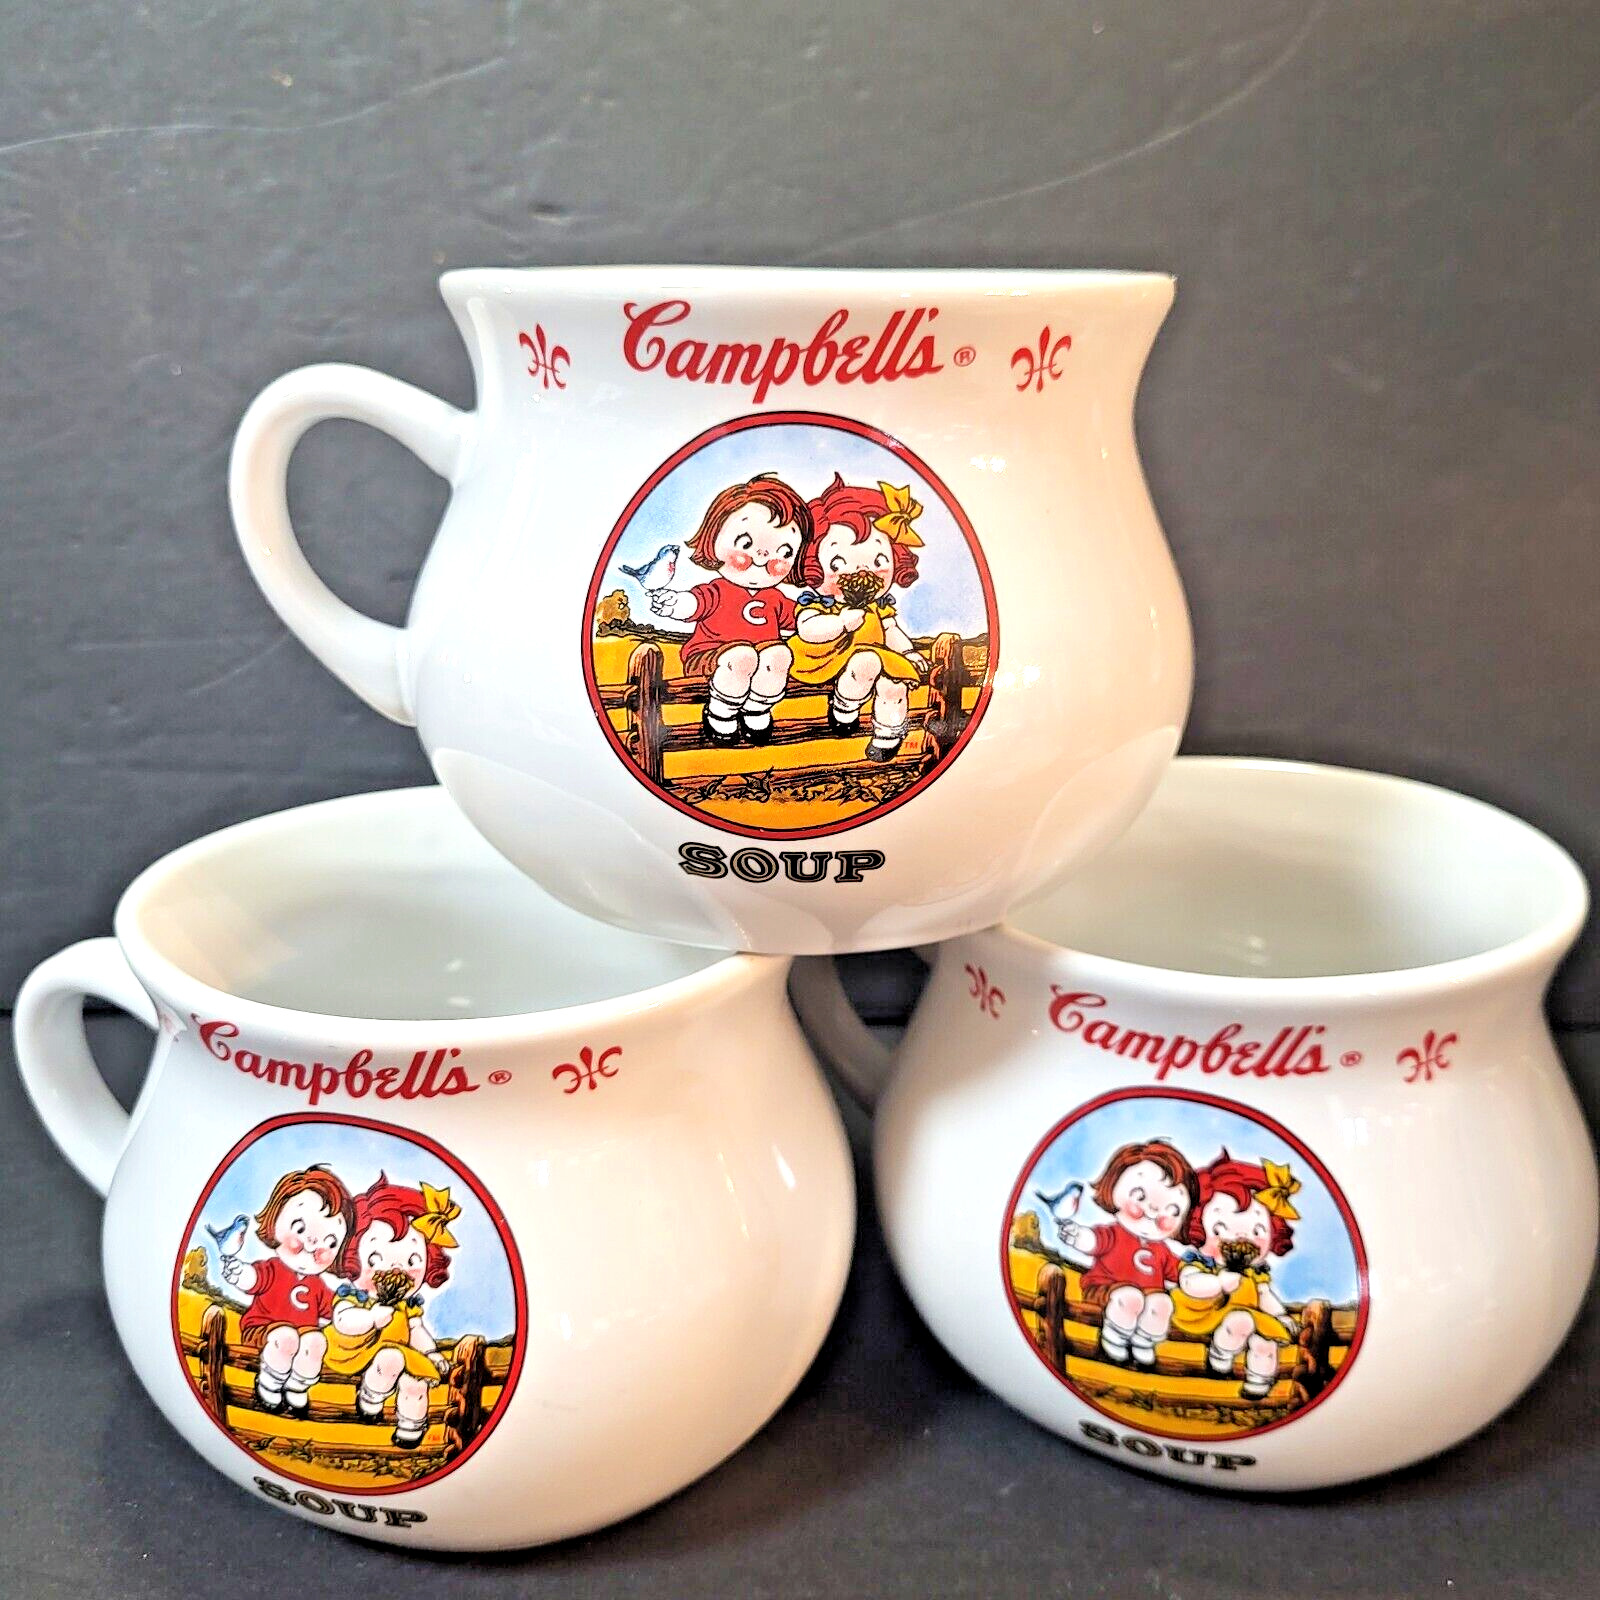 Set Of 3 Jumbo Campbell's Soup Mugs Cups Bowls Ceramic 2000 Boy Girl On Fence 